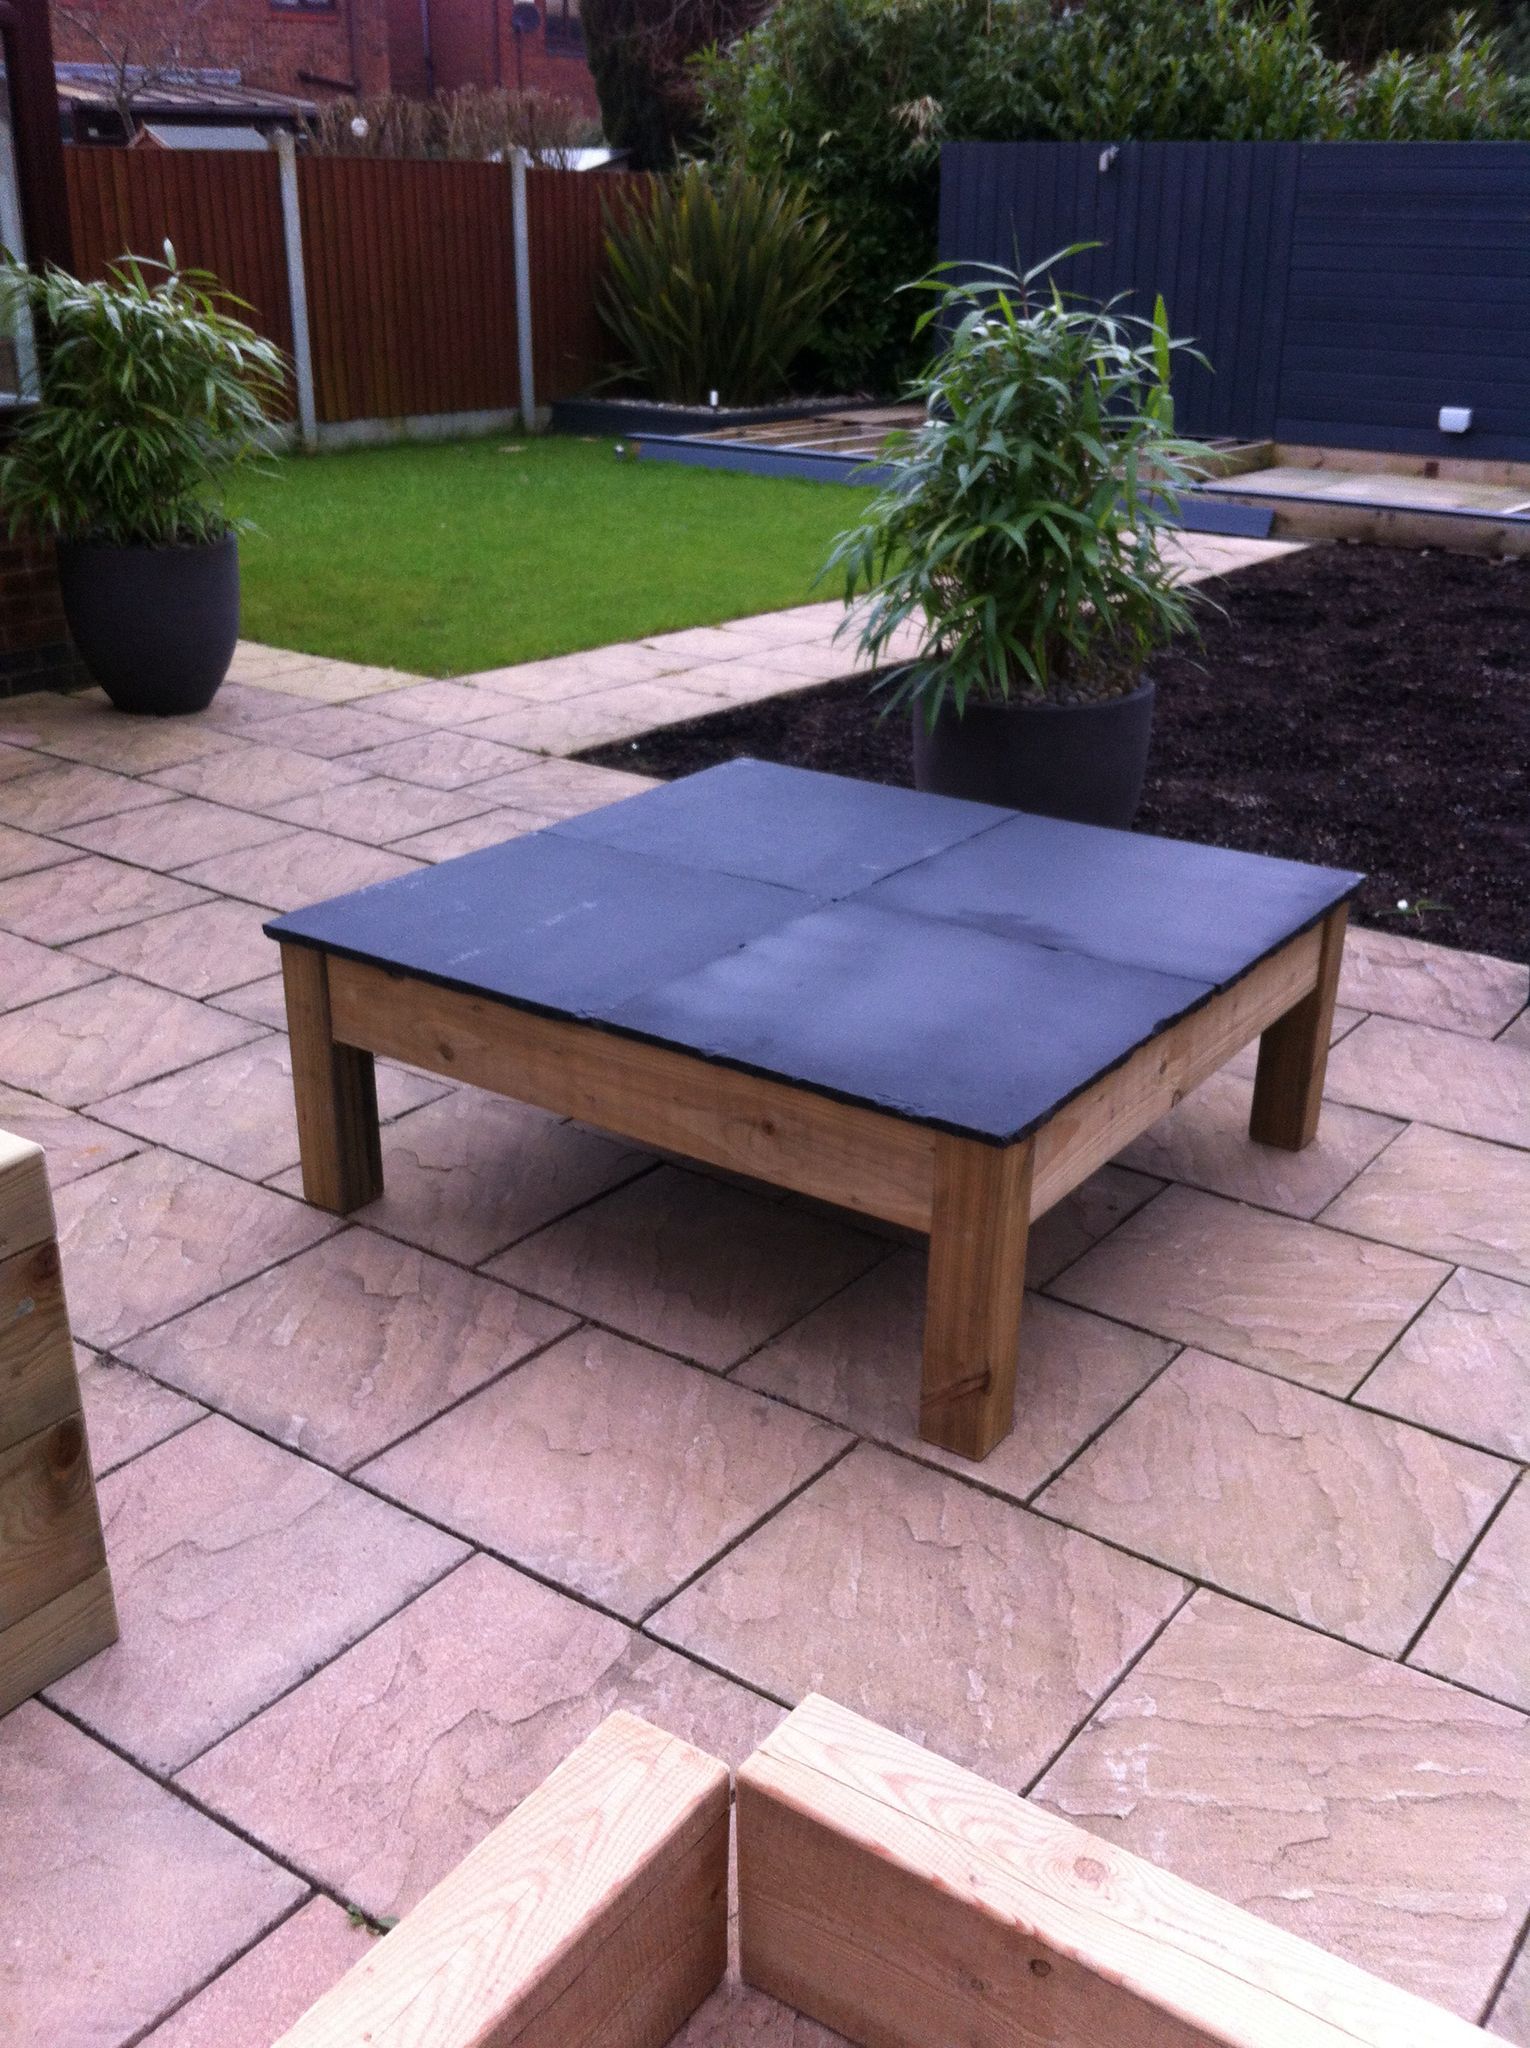 Diy Contemporary Outdoor Coffee Table ,with Limestone Paving Slabs As With Regard To Waterproof Coffee Tables (Gallery 16 of 21)